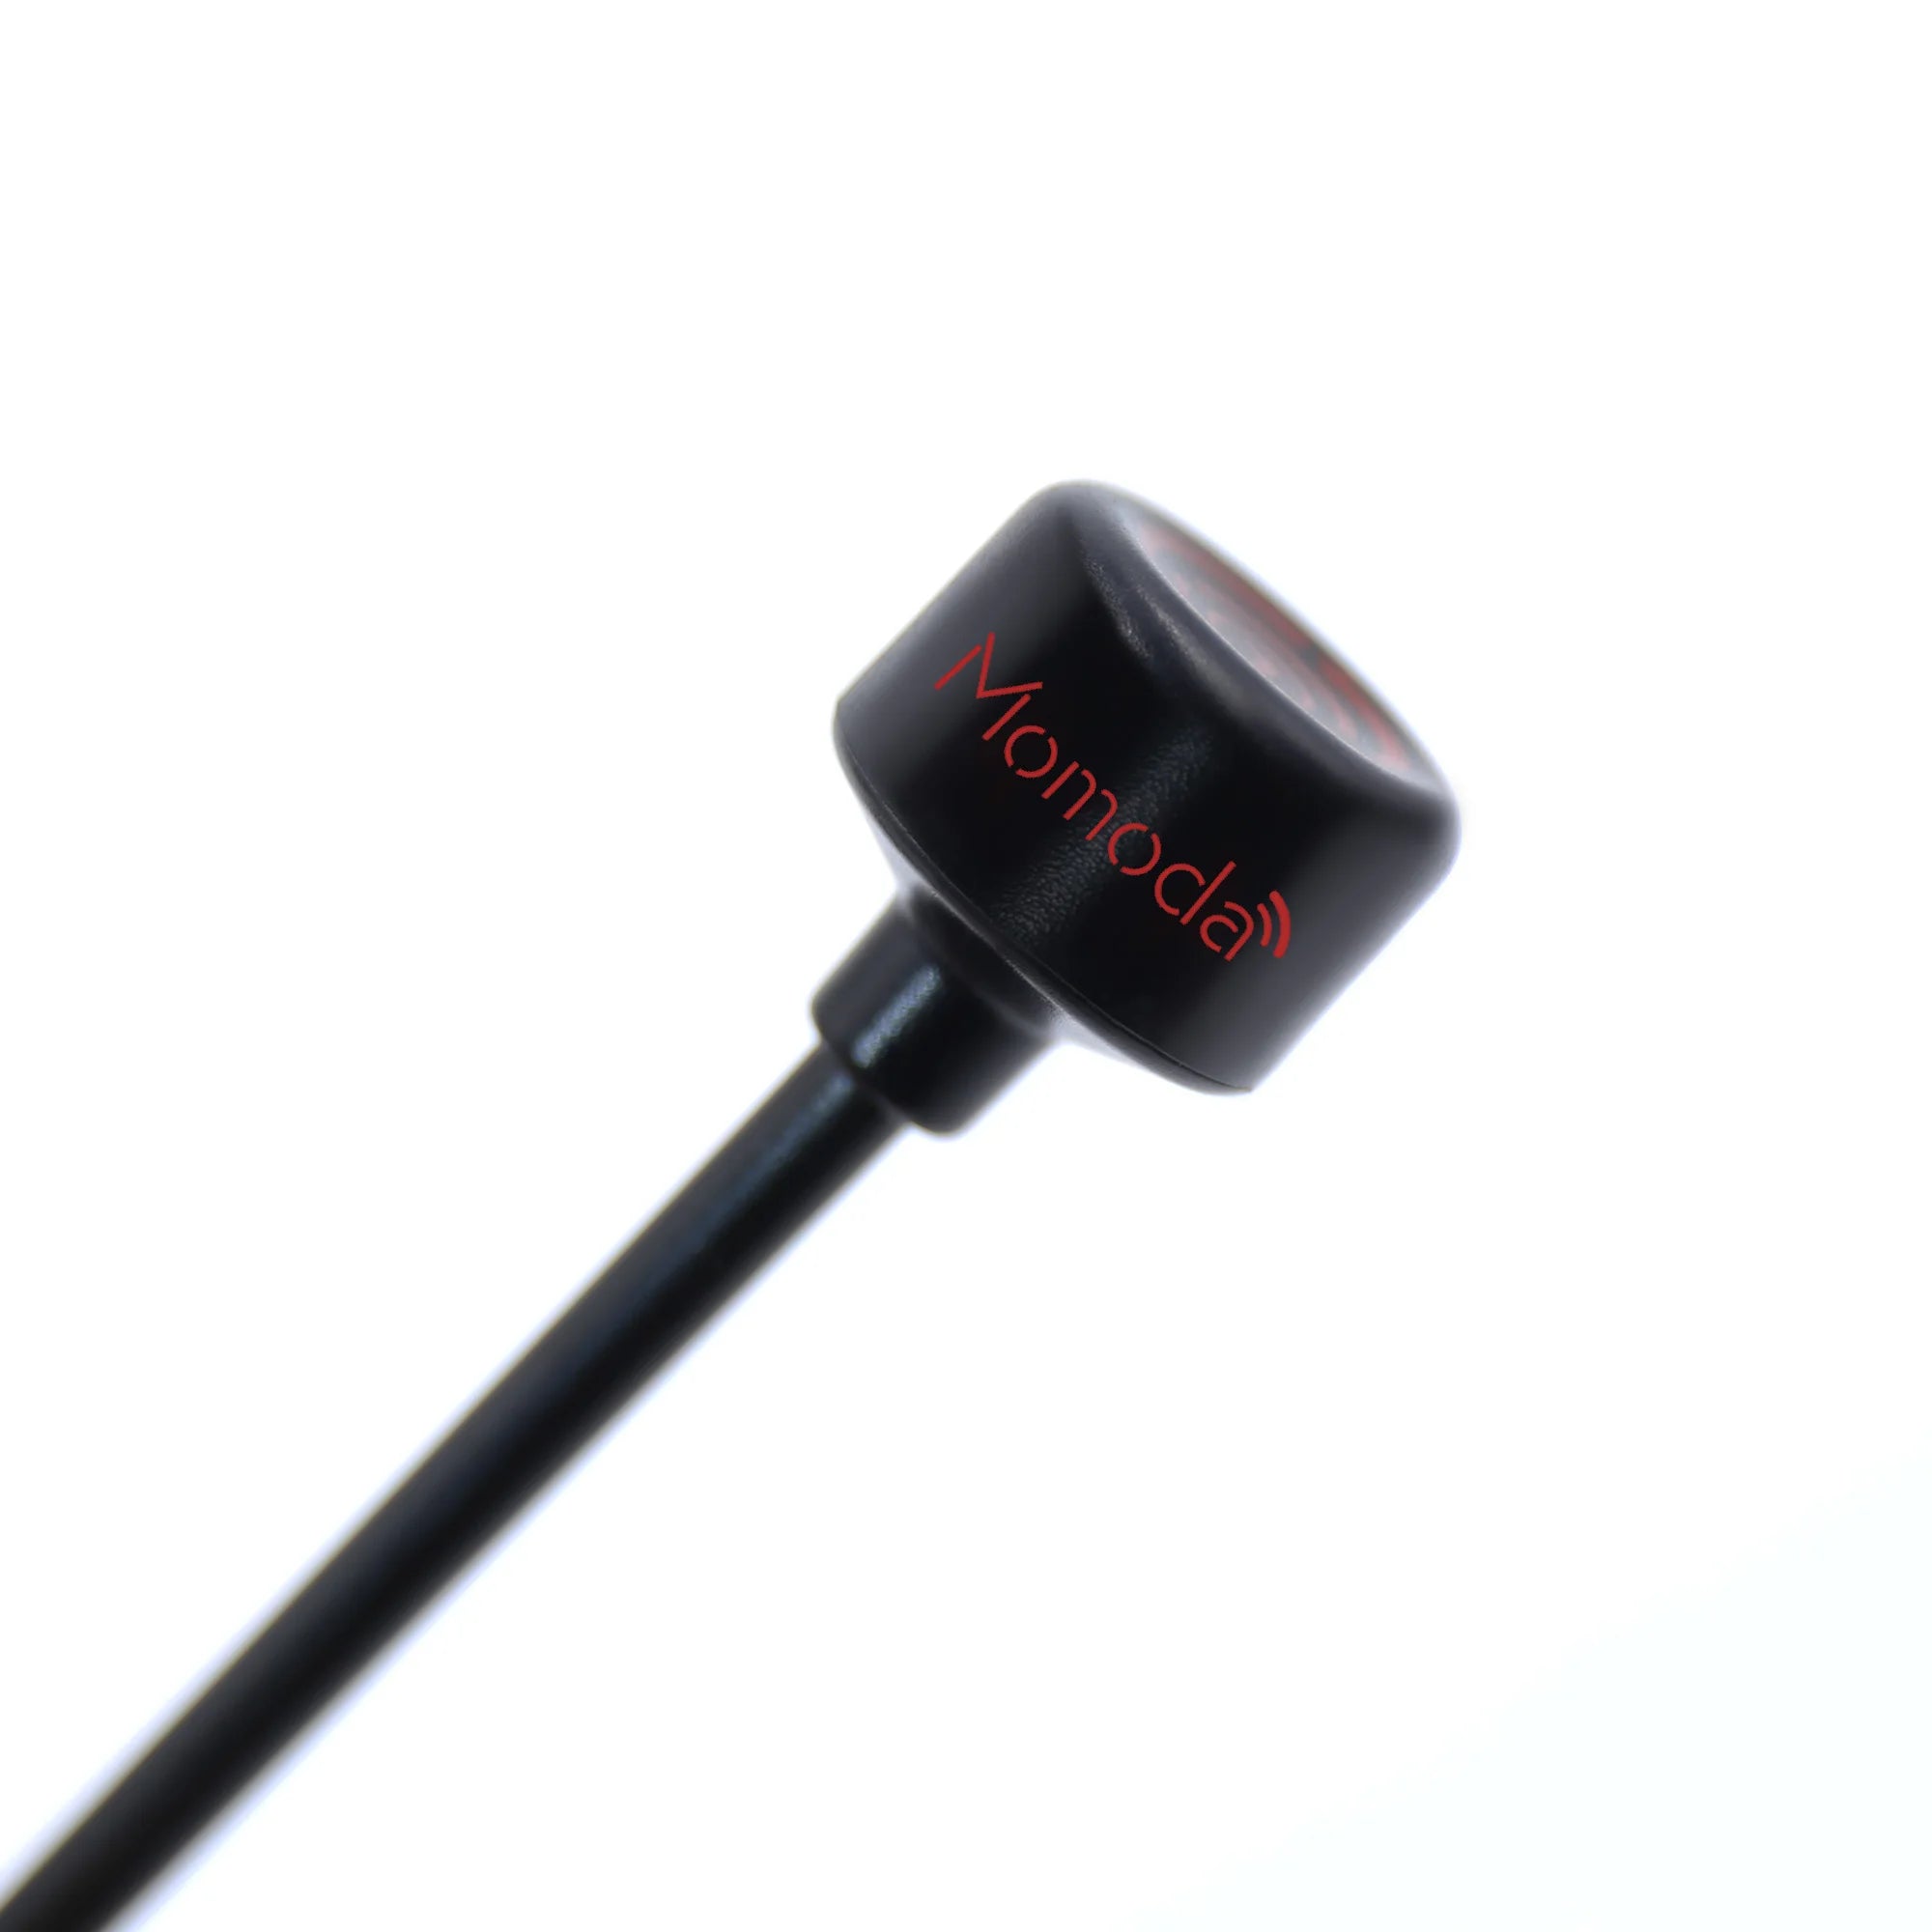 GEPRC Momoda 5.8G Antenna, antenna has good gain performance and is very compact.